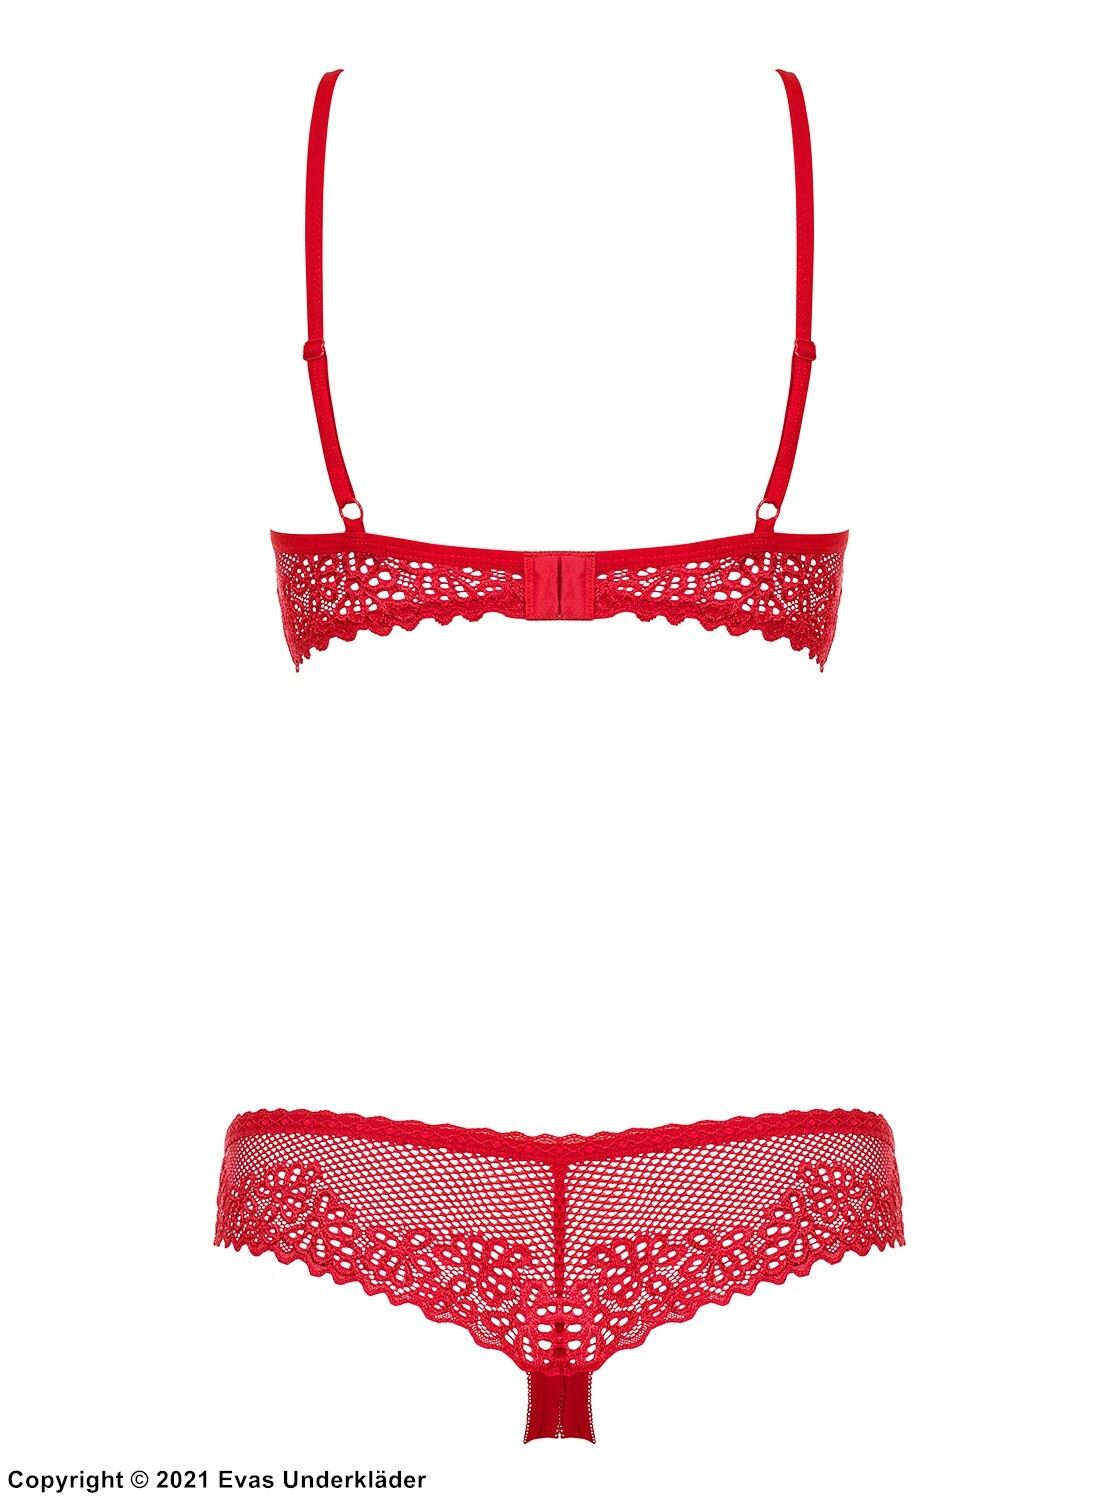 Revealing lingerie set, lace embroidery, half open cups